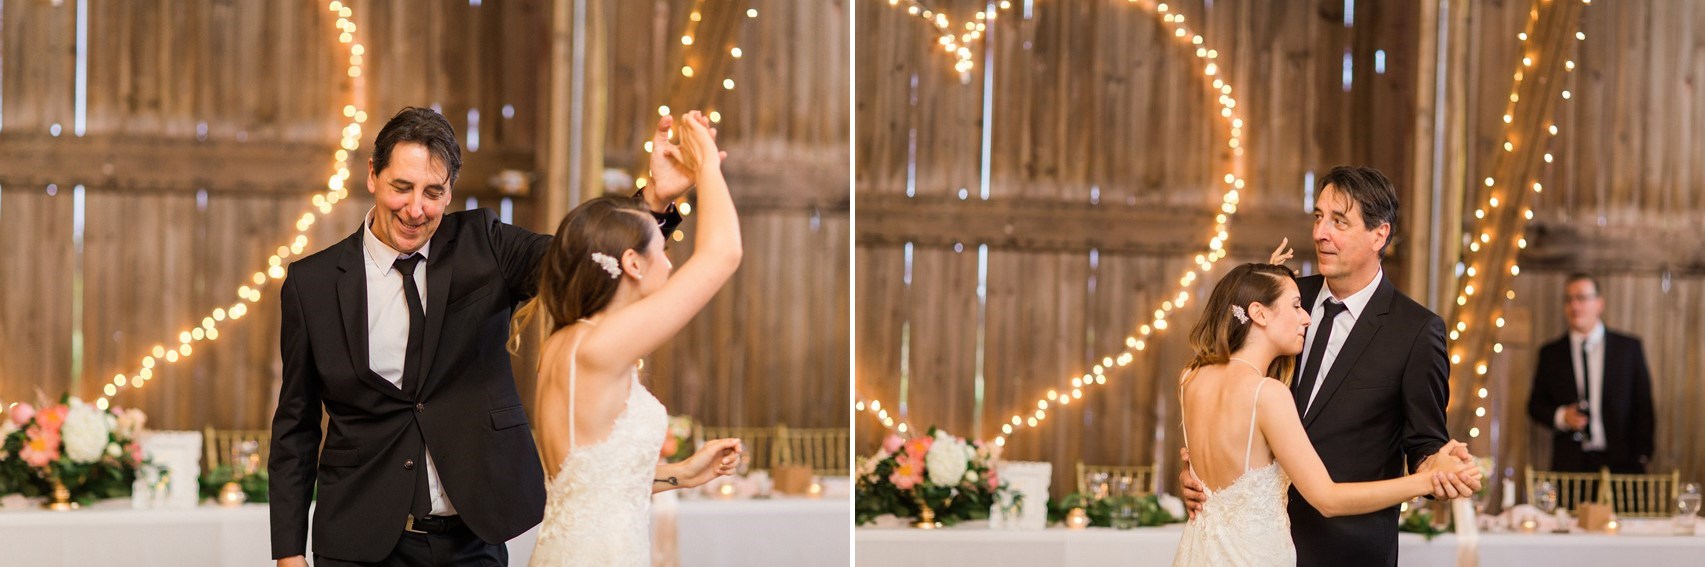 Father & Daughter Dance - A Romantic Modern-Vintage Wedding with an Elegant Barn Reception Romantic Modern-Vintage Wedding with an Elegant Barn Reception